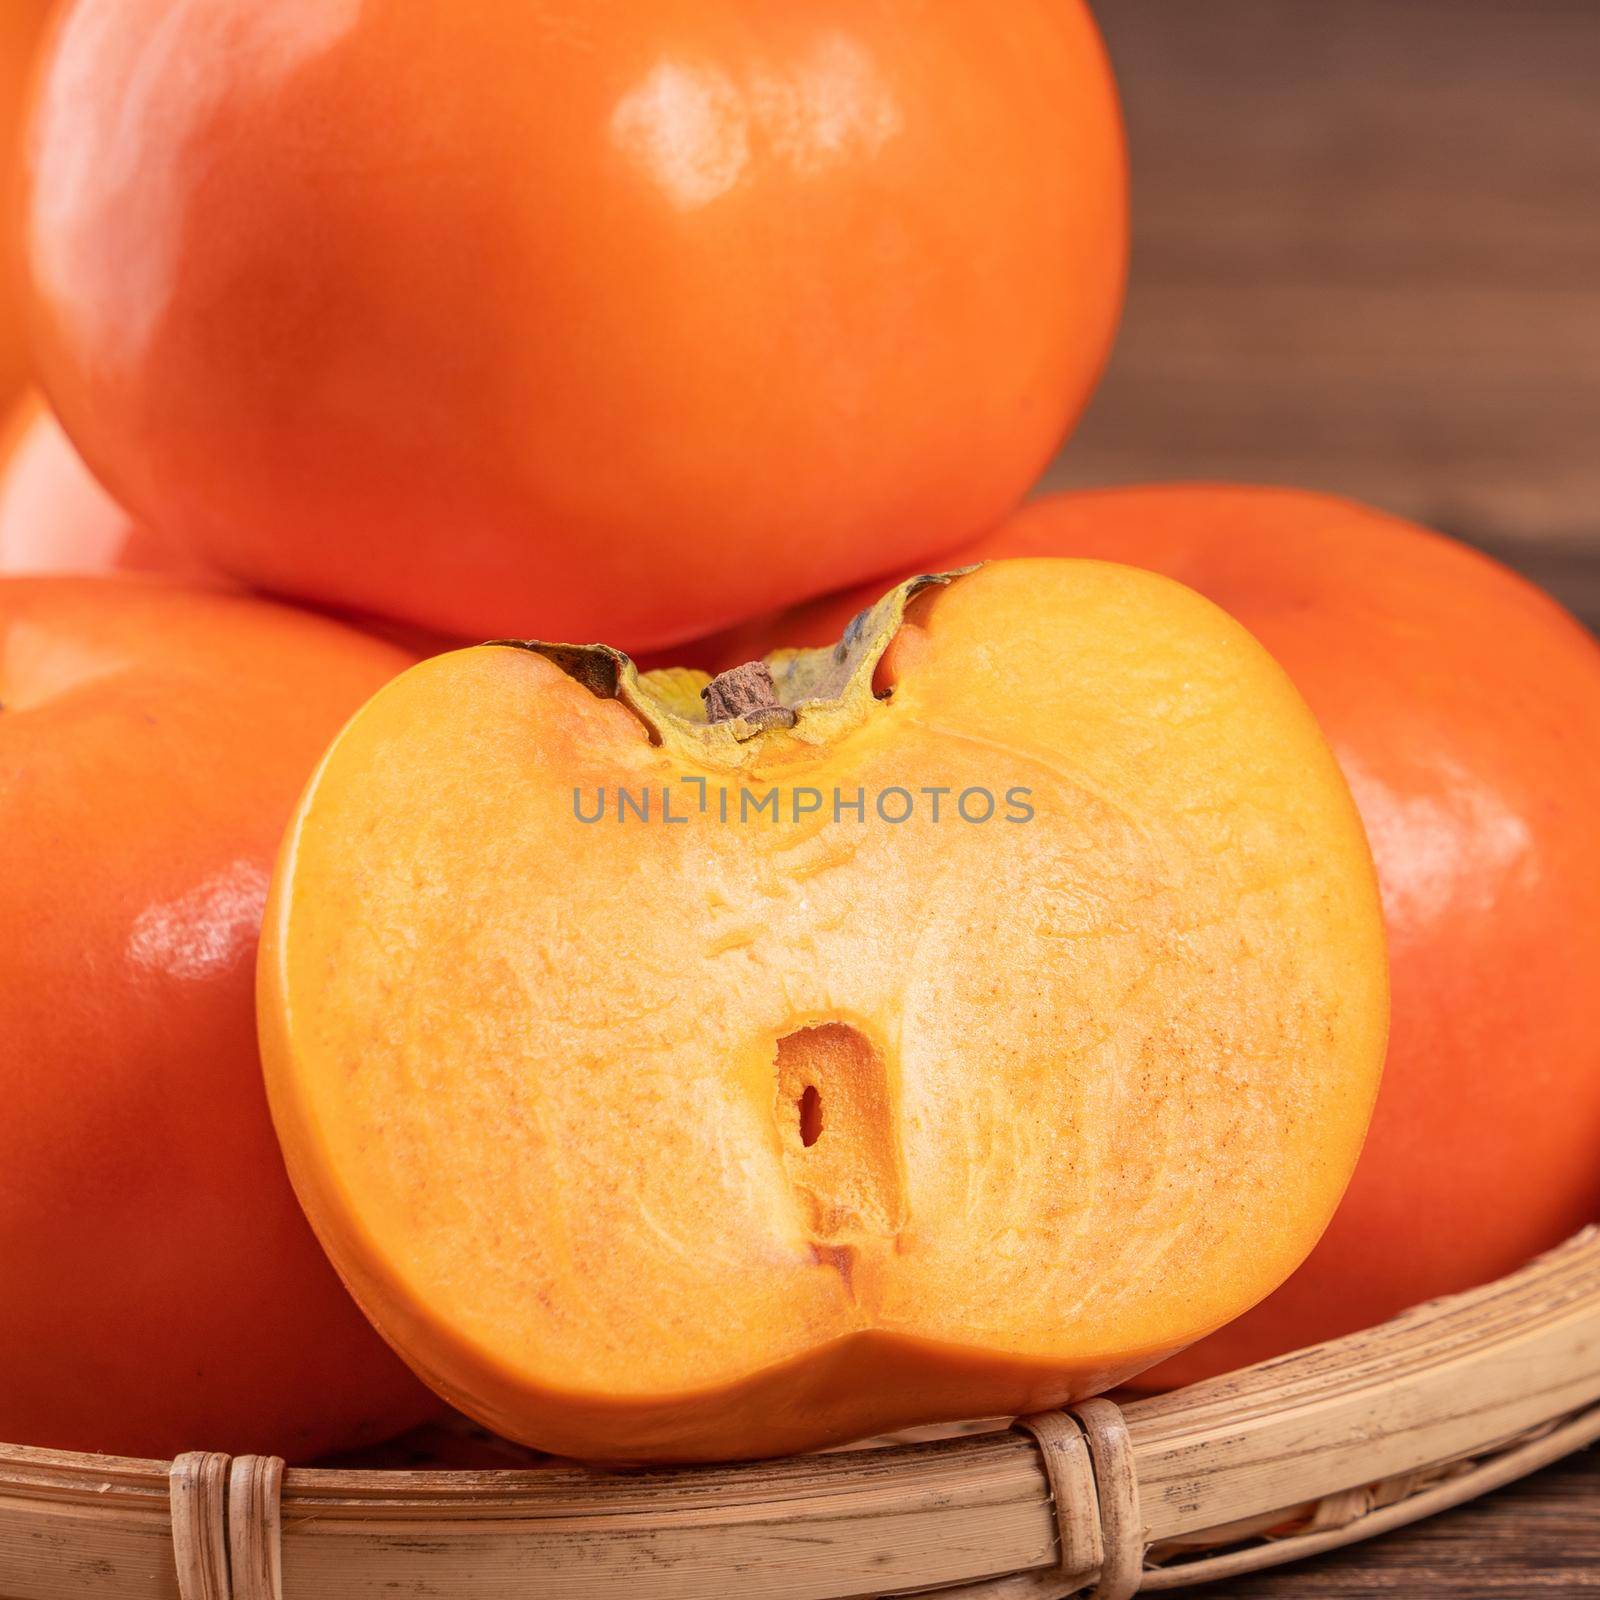 Fresh, beautiful orange color persimmon kaki on bamboo sieve over dark wooden table. Seasonal, traditional fruit of Chinese lunar new year, close up.